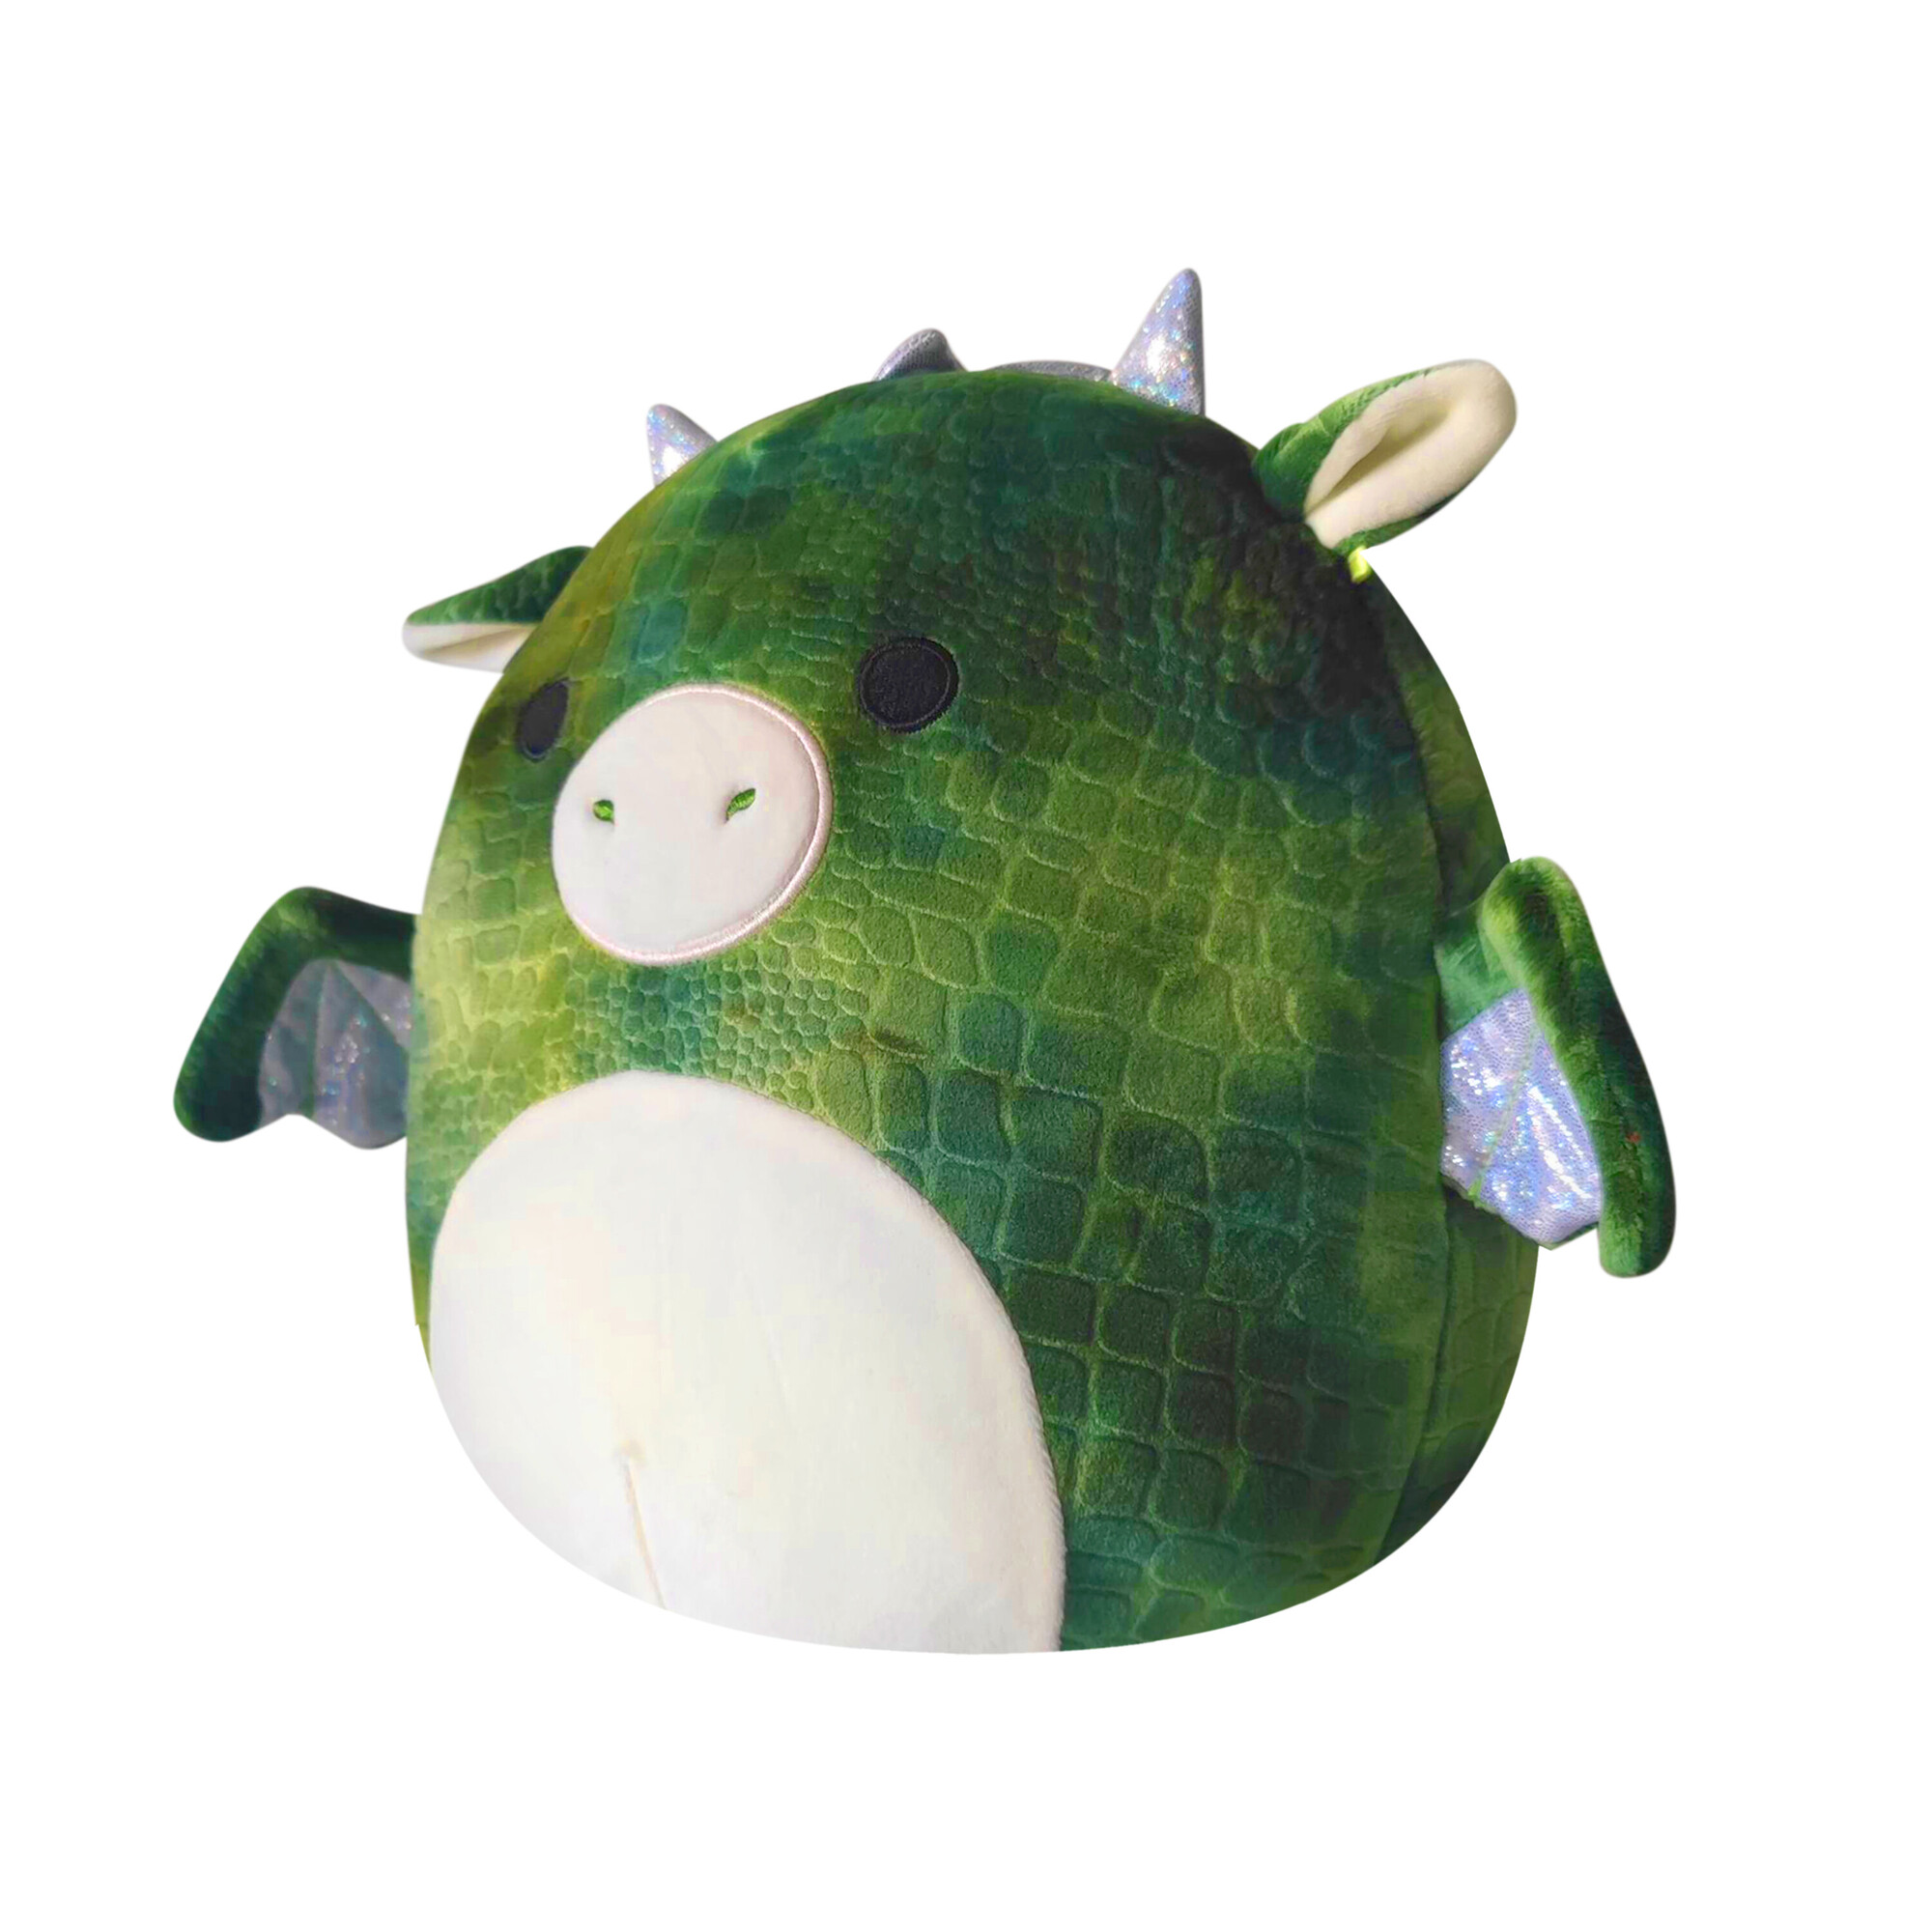 Squishmallows 10 inch Duke the Green Textured Dragon with Silver Horns - Child's Ultra Soft Stuffed Plush Toy - image 4 of 7